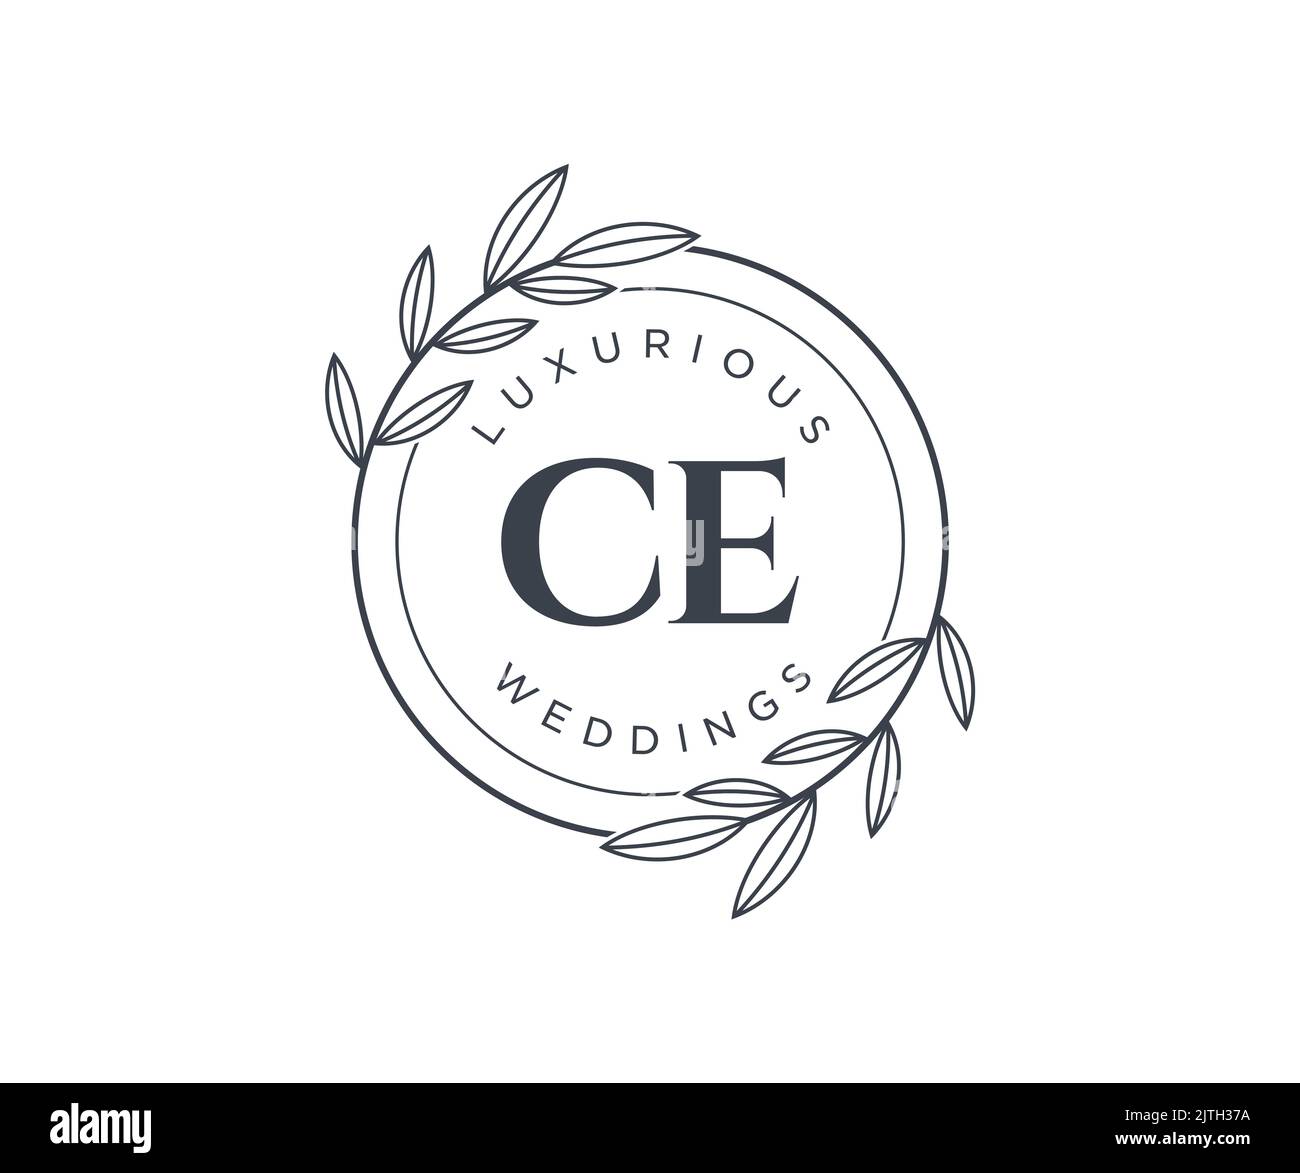 CE Initials letter Wedding monogram logos template, hand drawn modern minimalistic and floral templates for Invitation cards, Save the Date, elegant Stock Vector